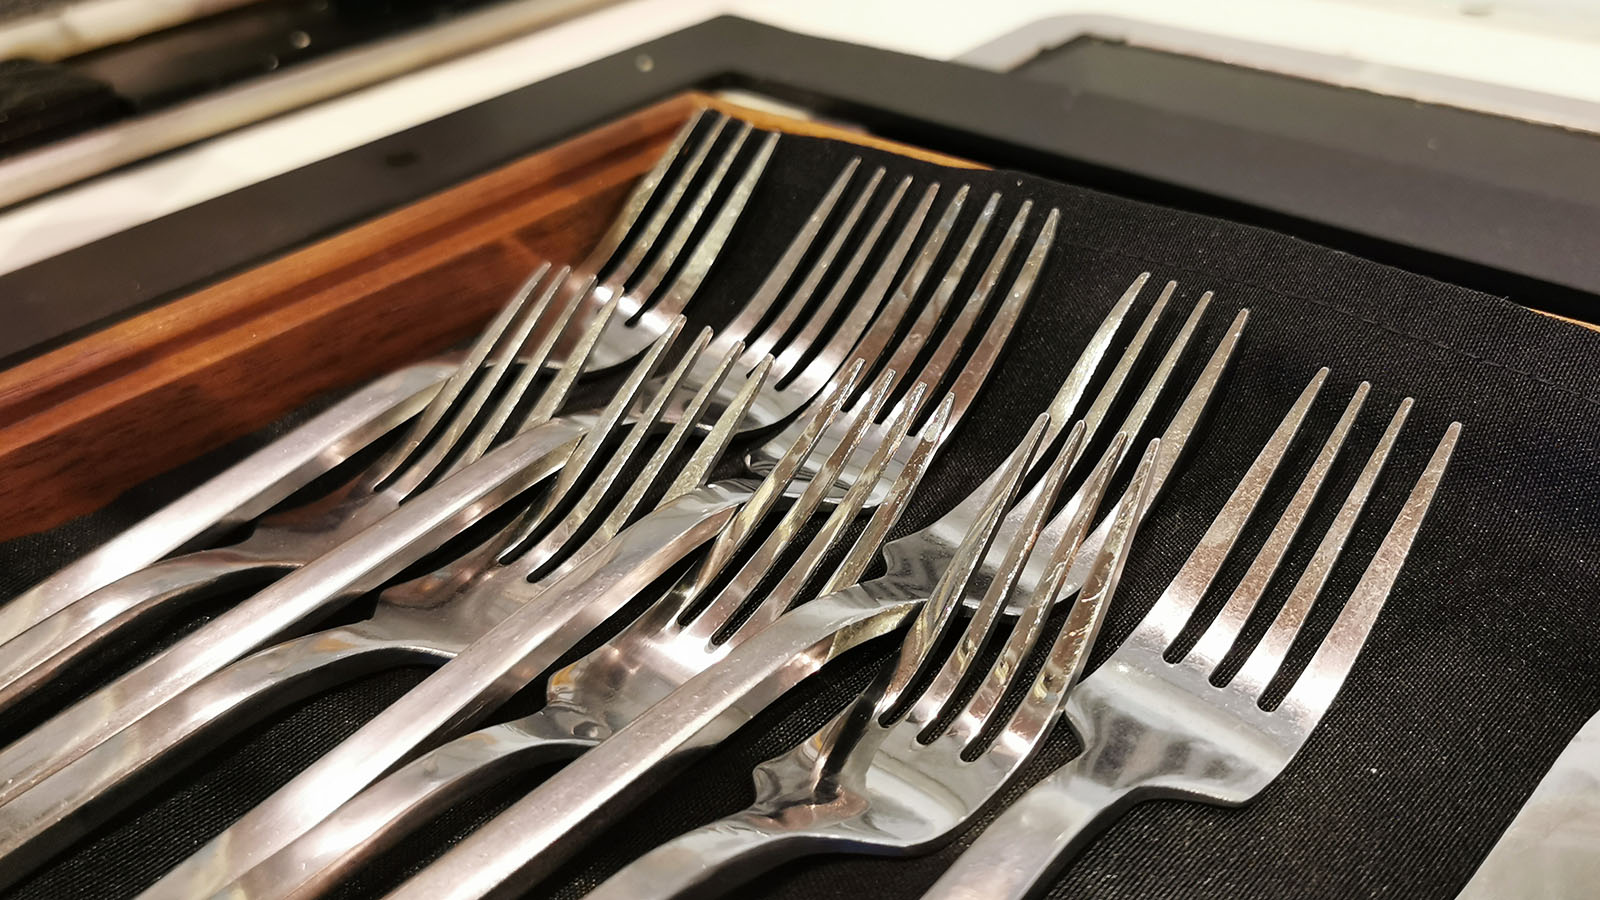 Forks in the Star Alliance Lounge (First Class), Los Angeles